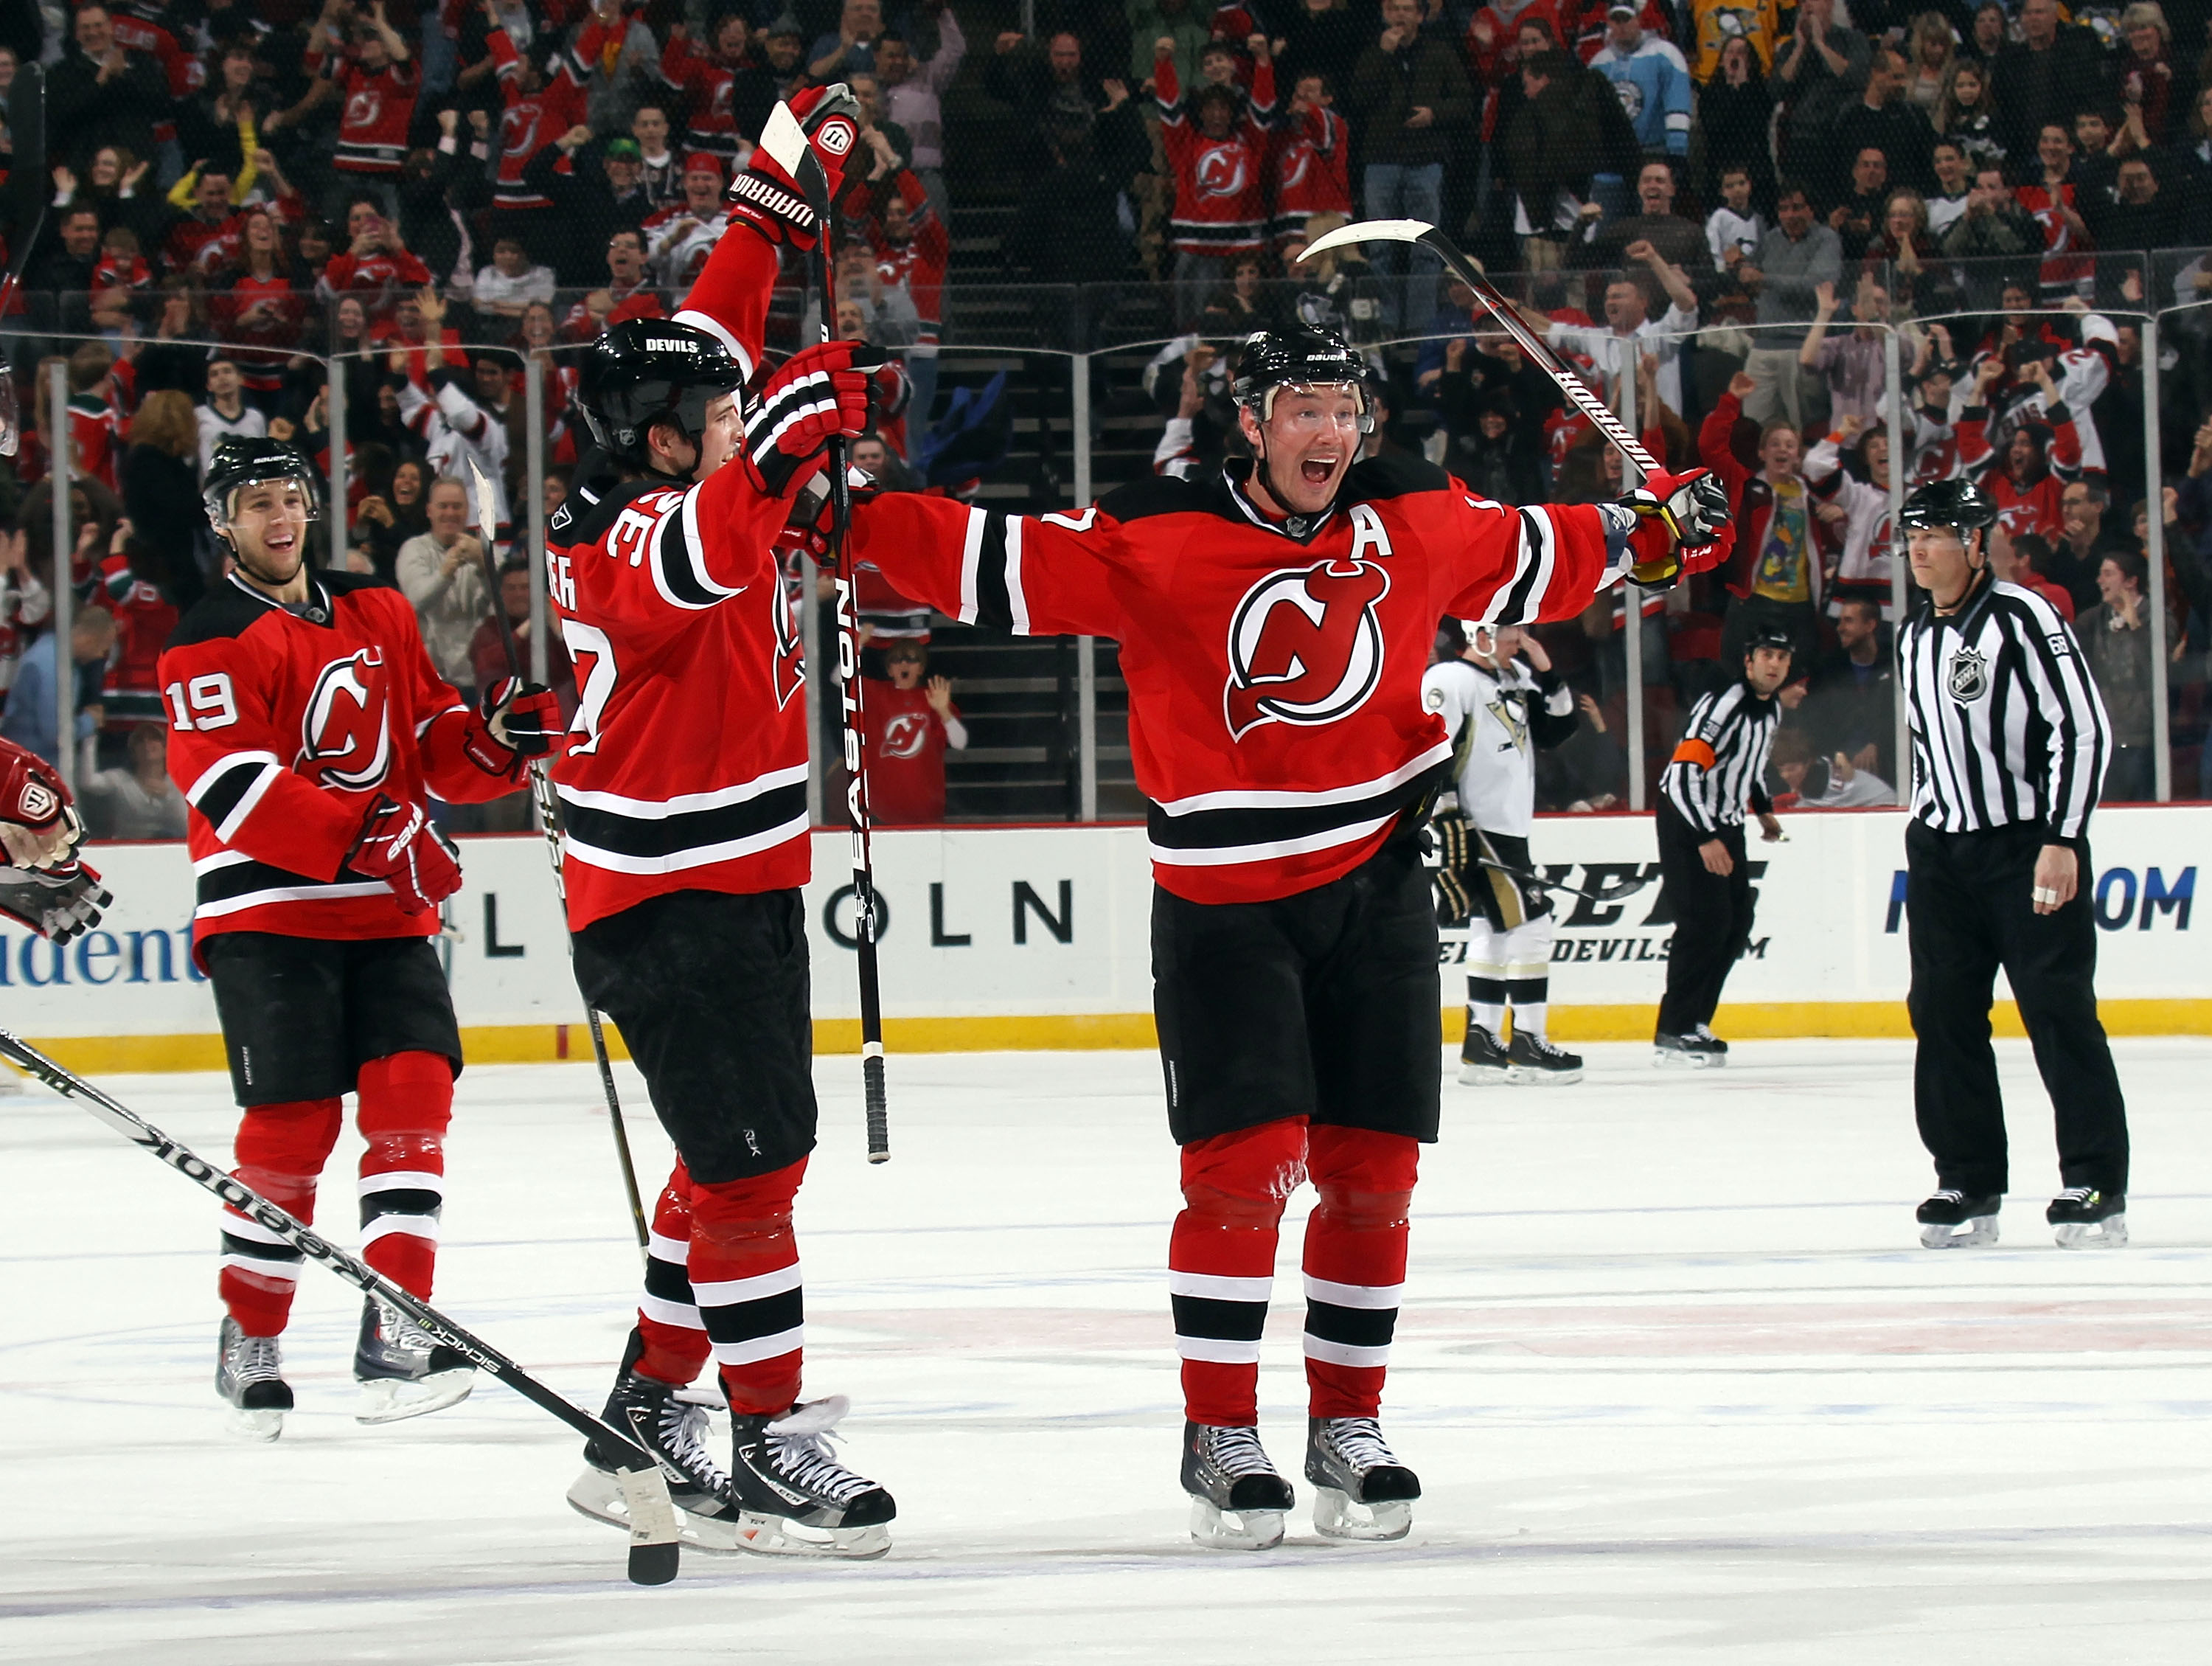 New Jersey Devils vs. Pittsburgh Penguins: Live Score, Updates and Analysis, News, Scores, Highlights, Stats, and Rumors